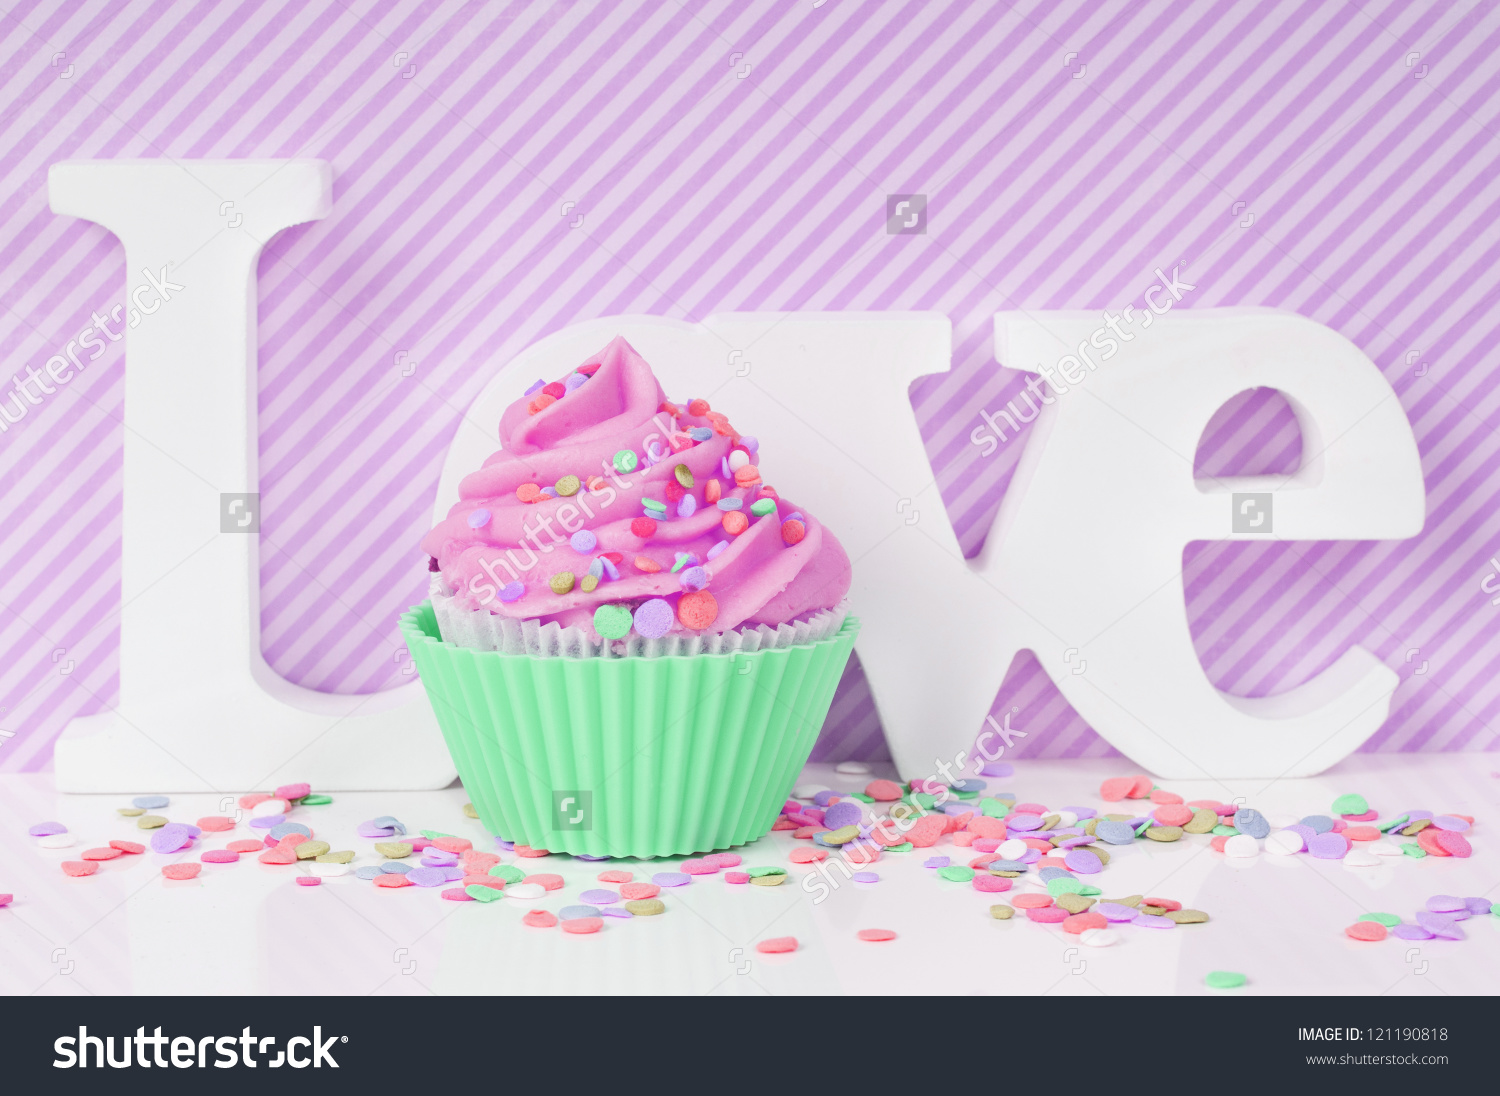 Pink Cupcake On A Striped Valentine Love Background Stock Photo